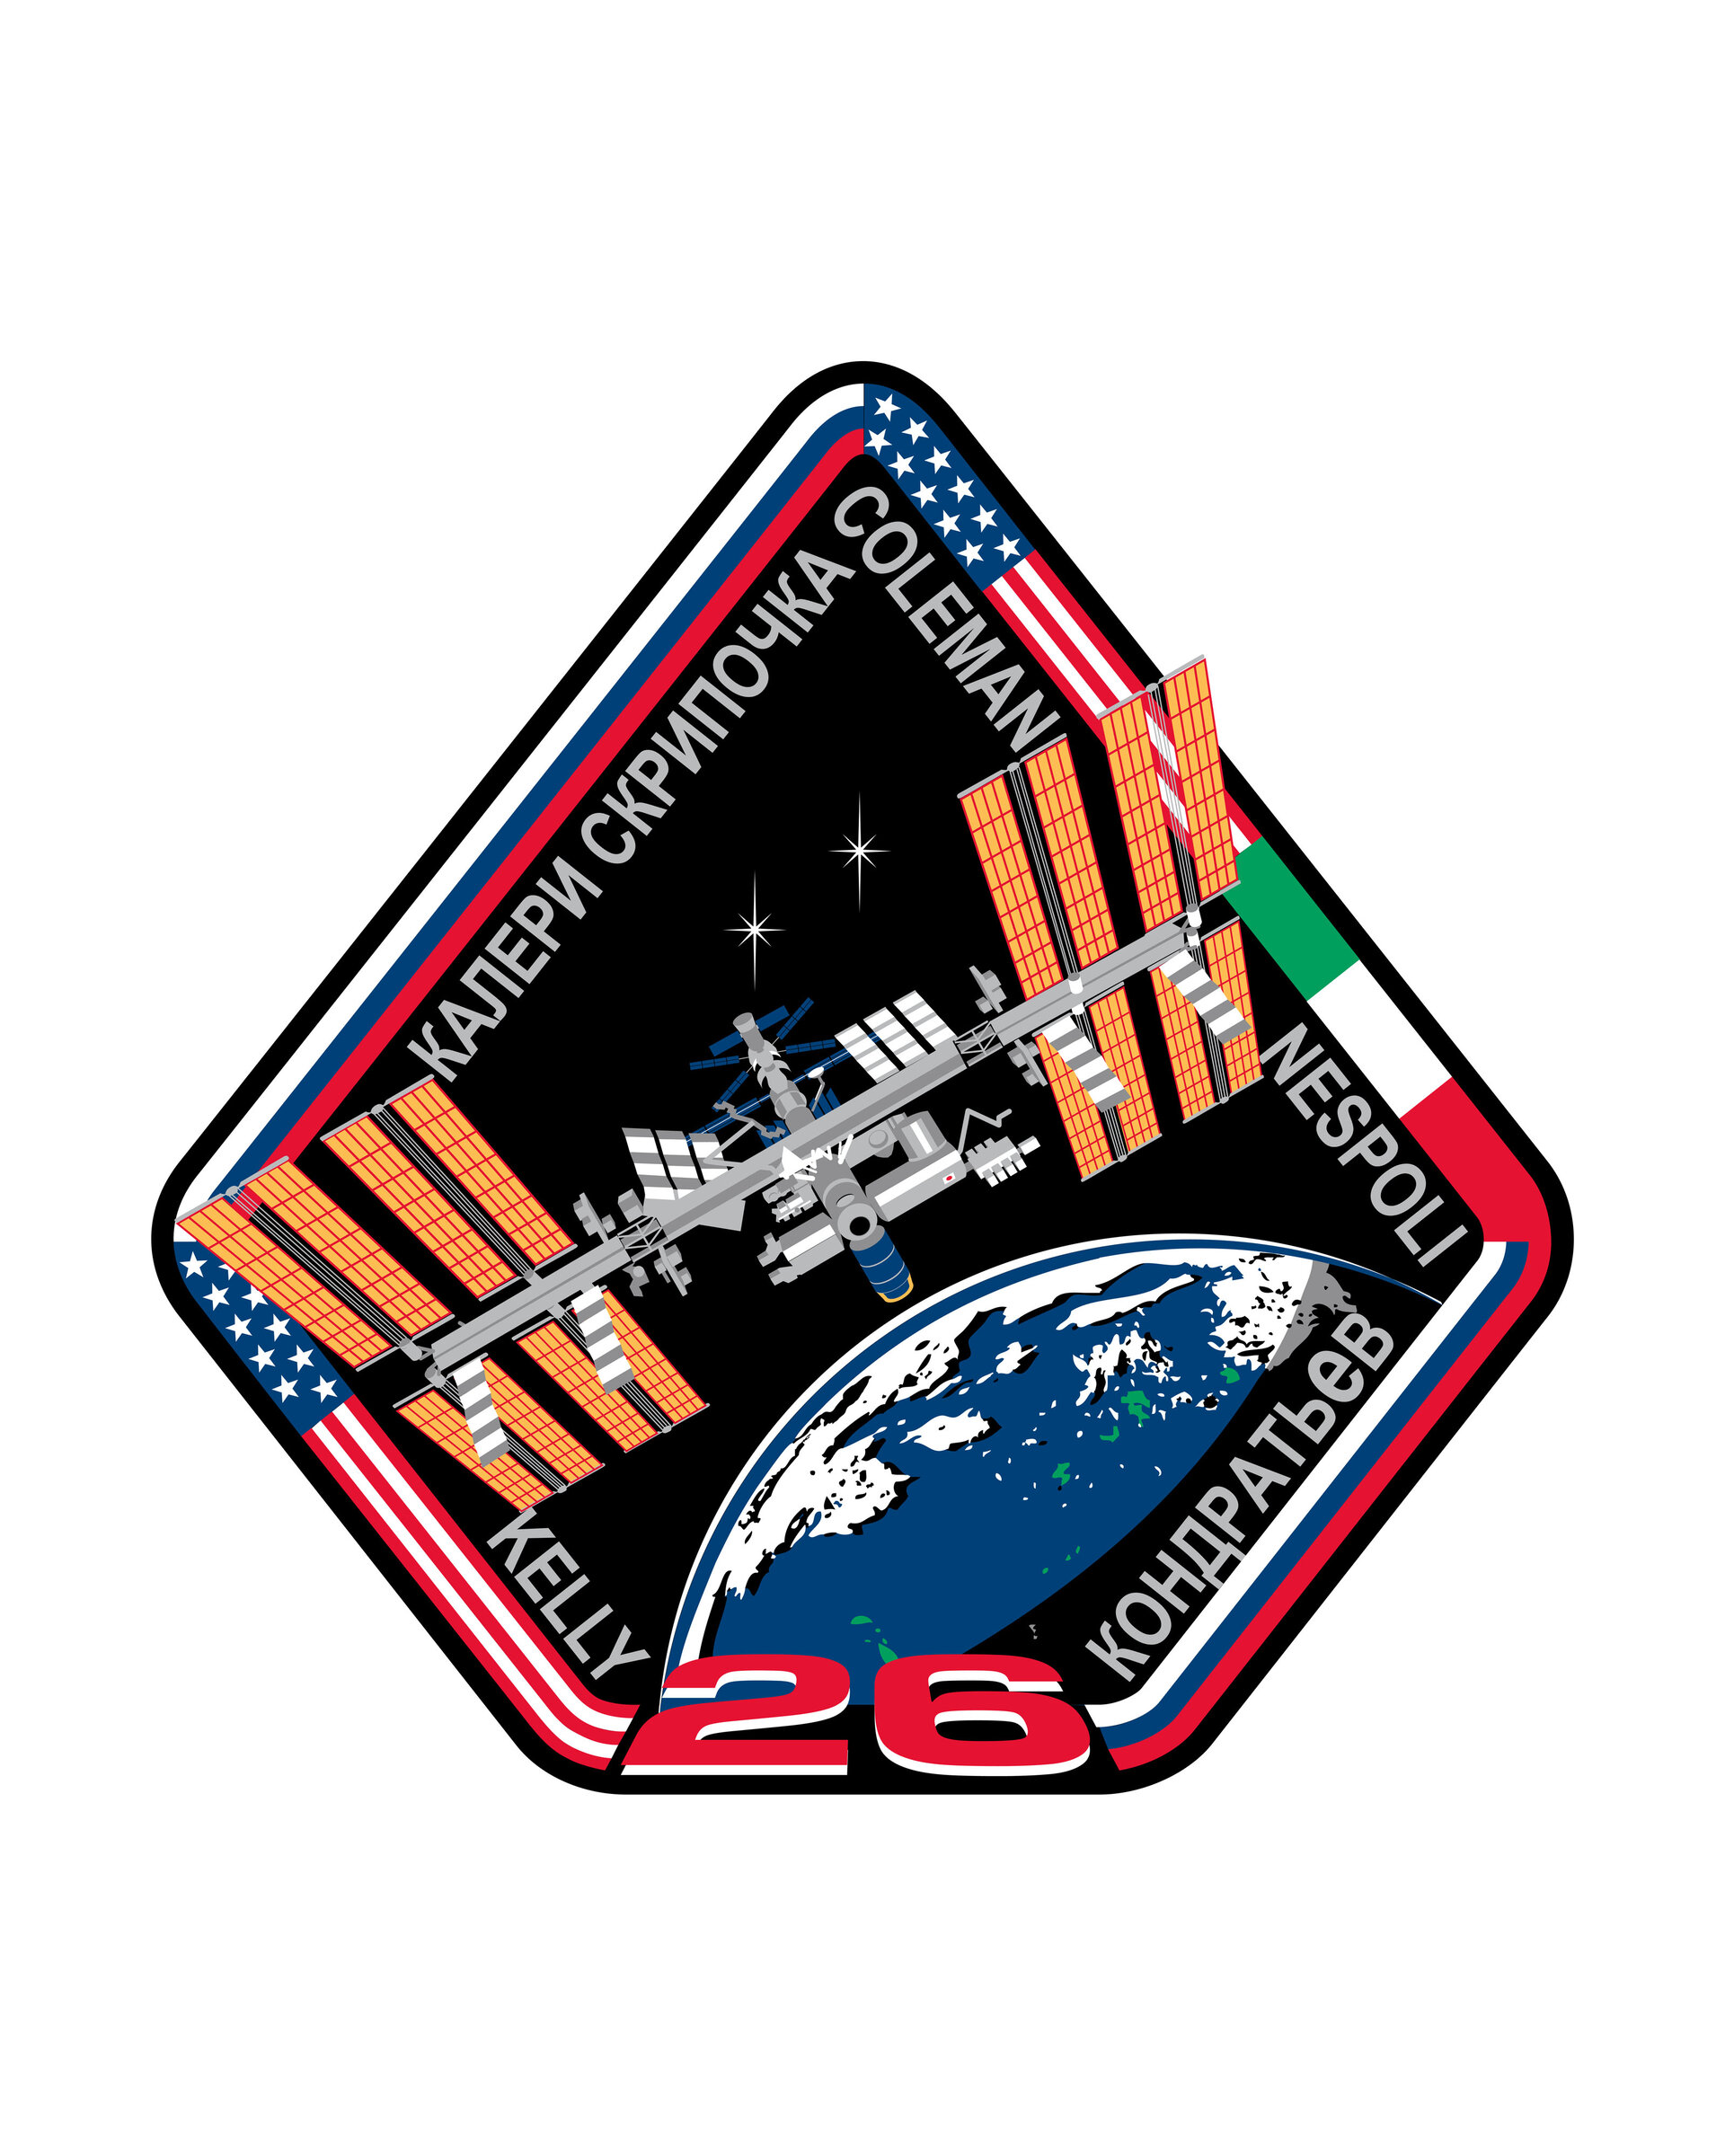 ISS Expedition 26 patch, 2010